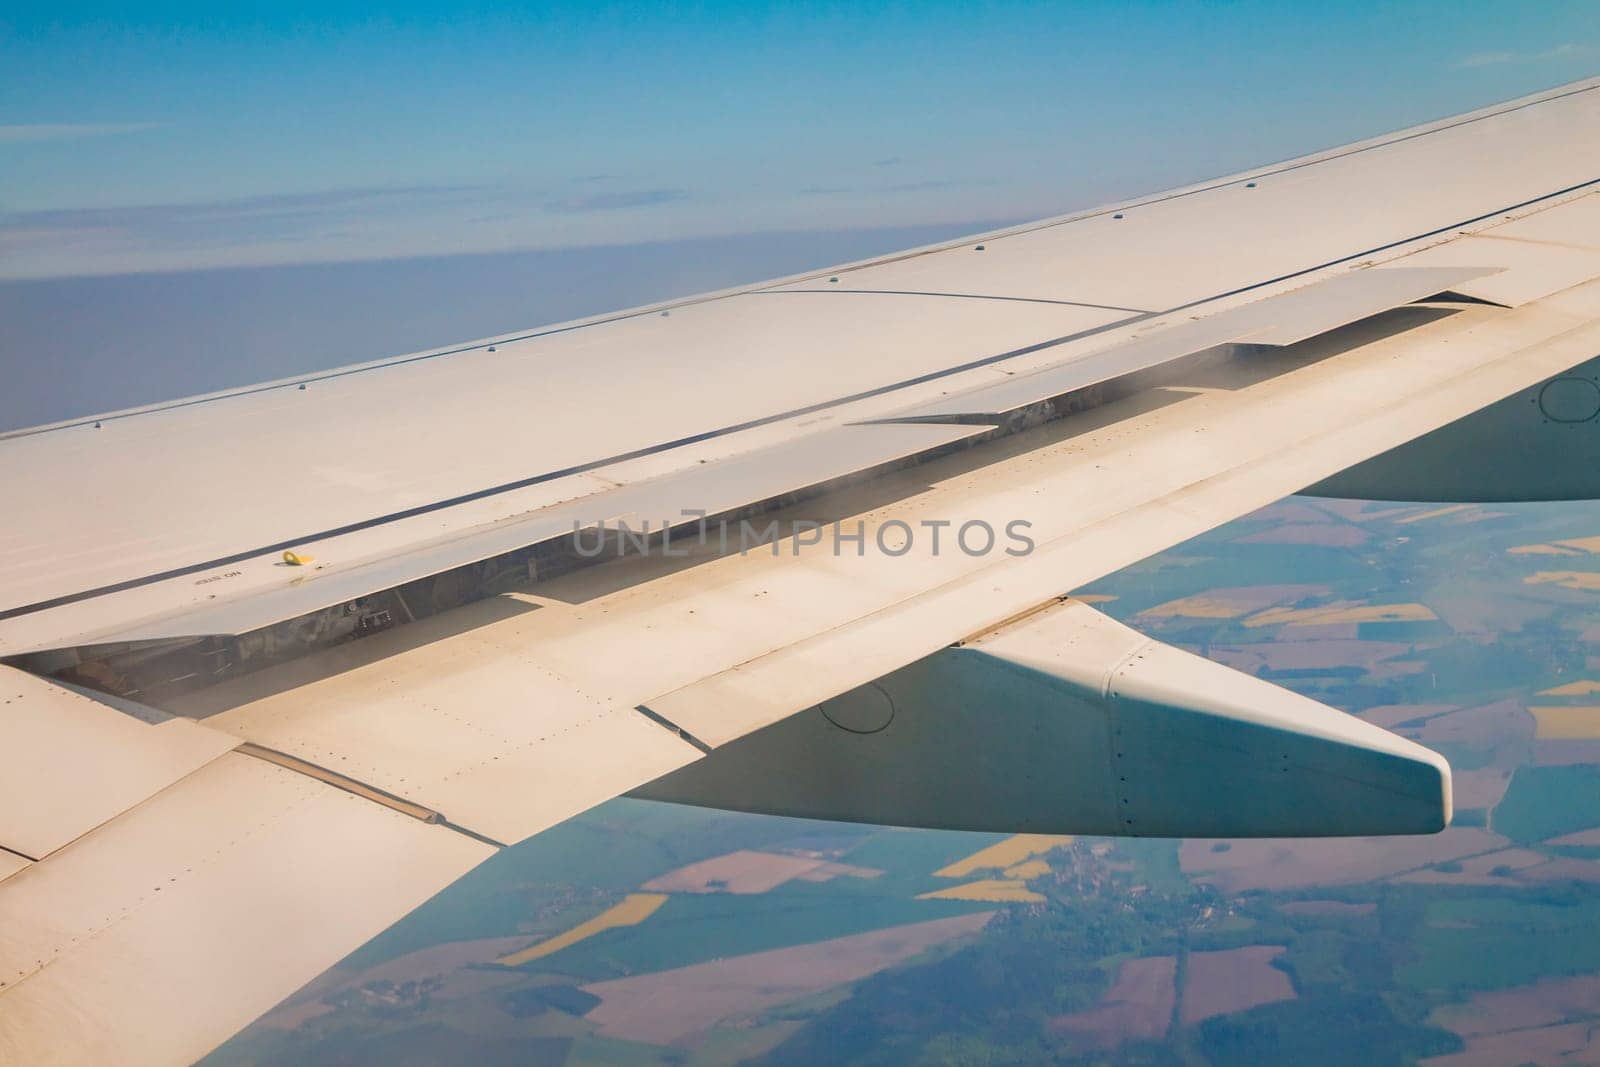 Airplane wing with the spoiler open on the sky over land.